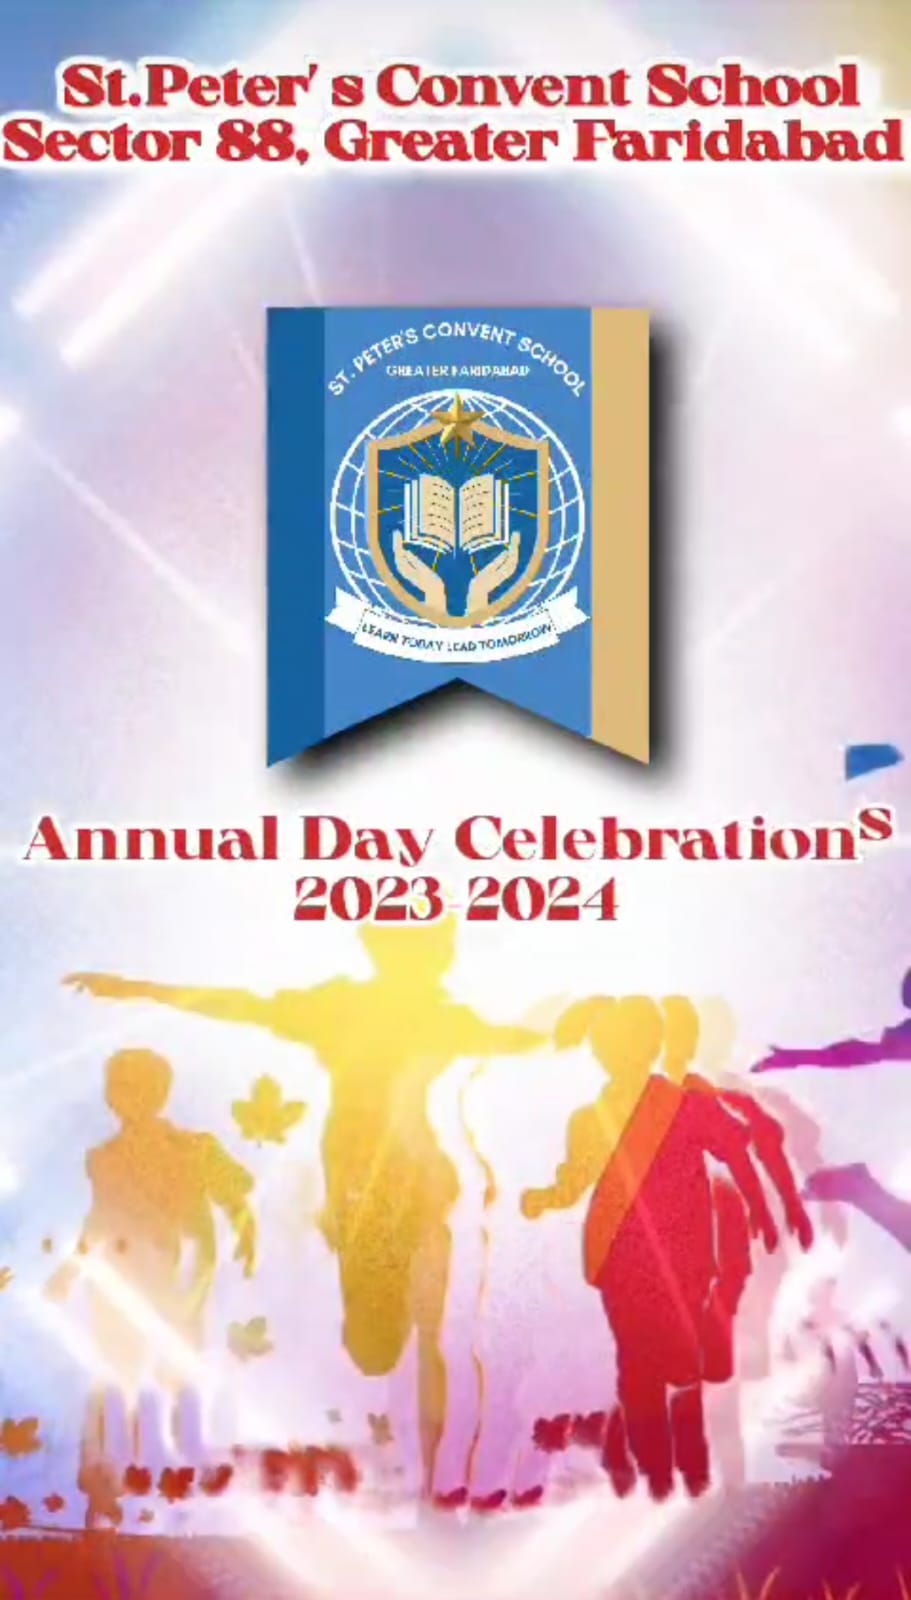 1 Day to go to Annual Day Celebration 2023